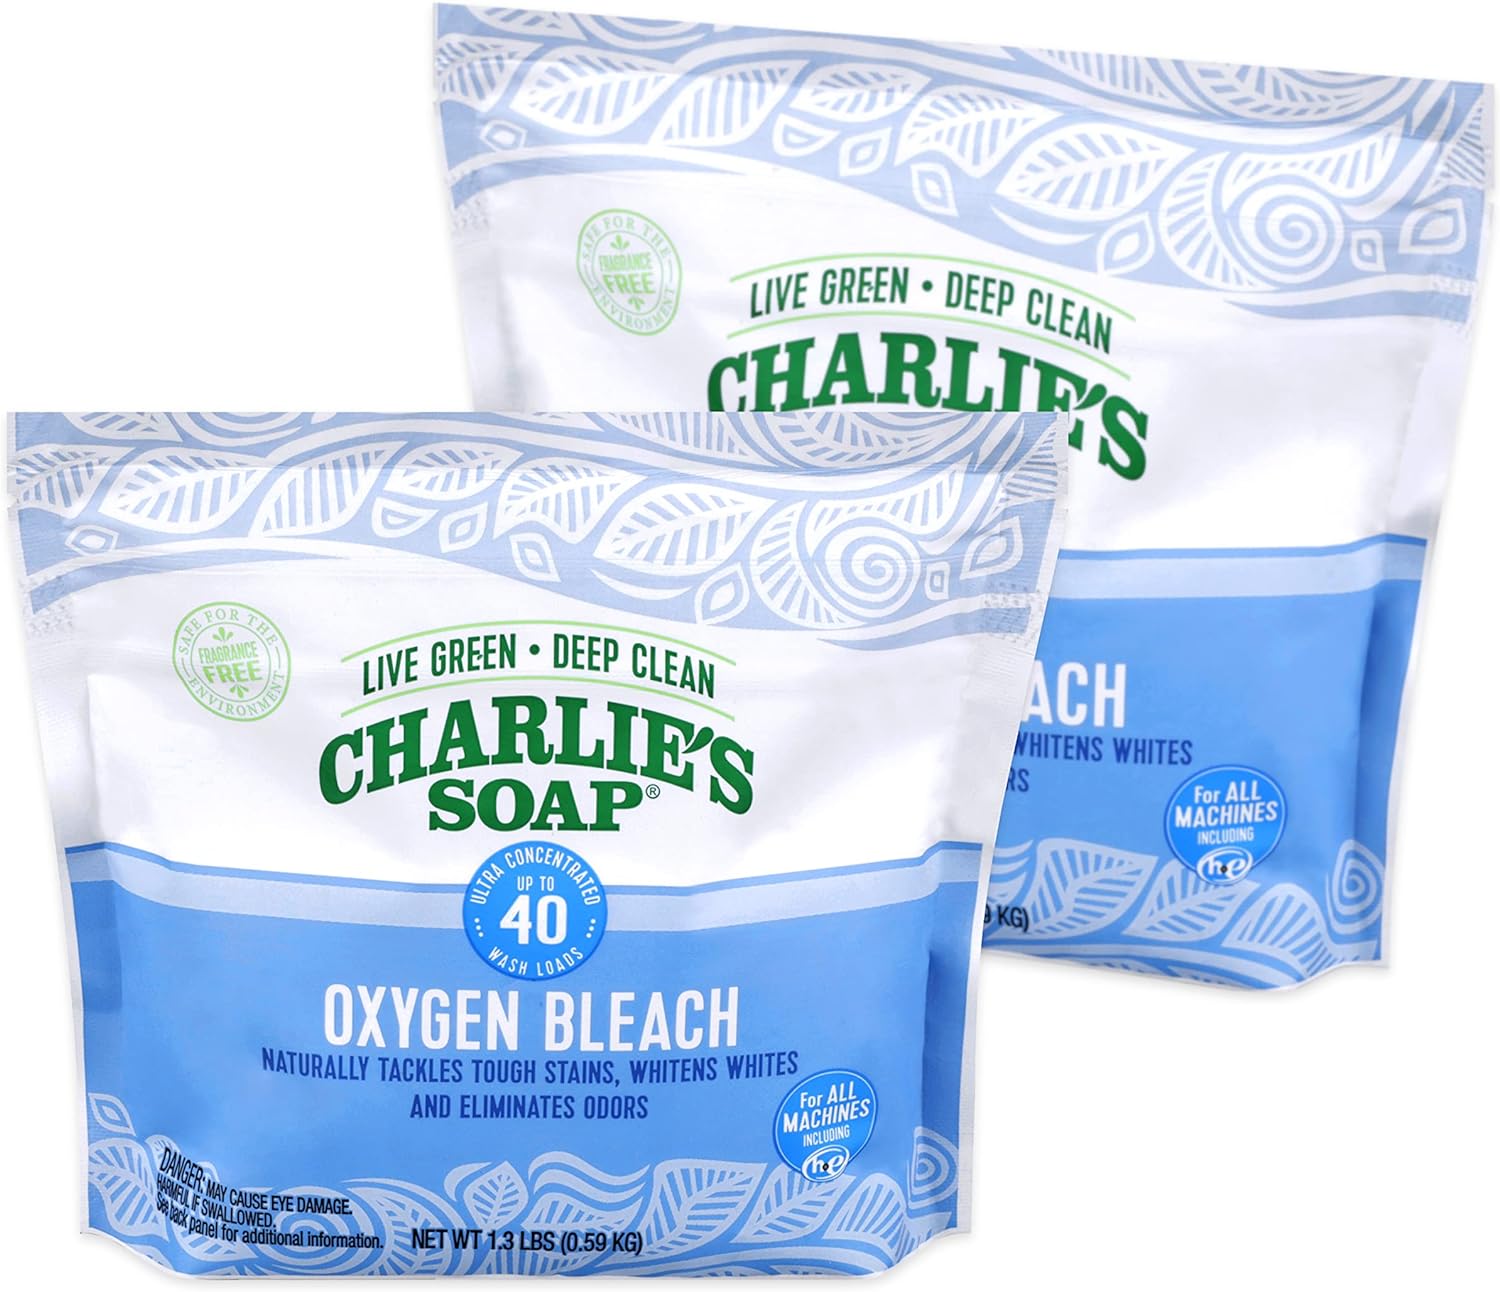 Charlie's Soap Oxygen Powered Bleach Powder, Color Bleach For Clothes, Safe Bleach for White Clothes, An Unscented Fragrance Free Non Chlorine Bleach 1.3 lbs (2 Pack)